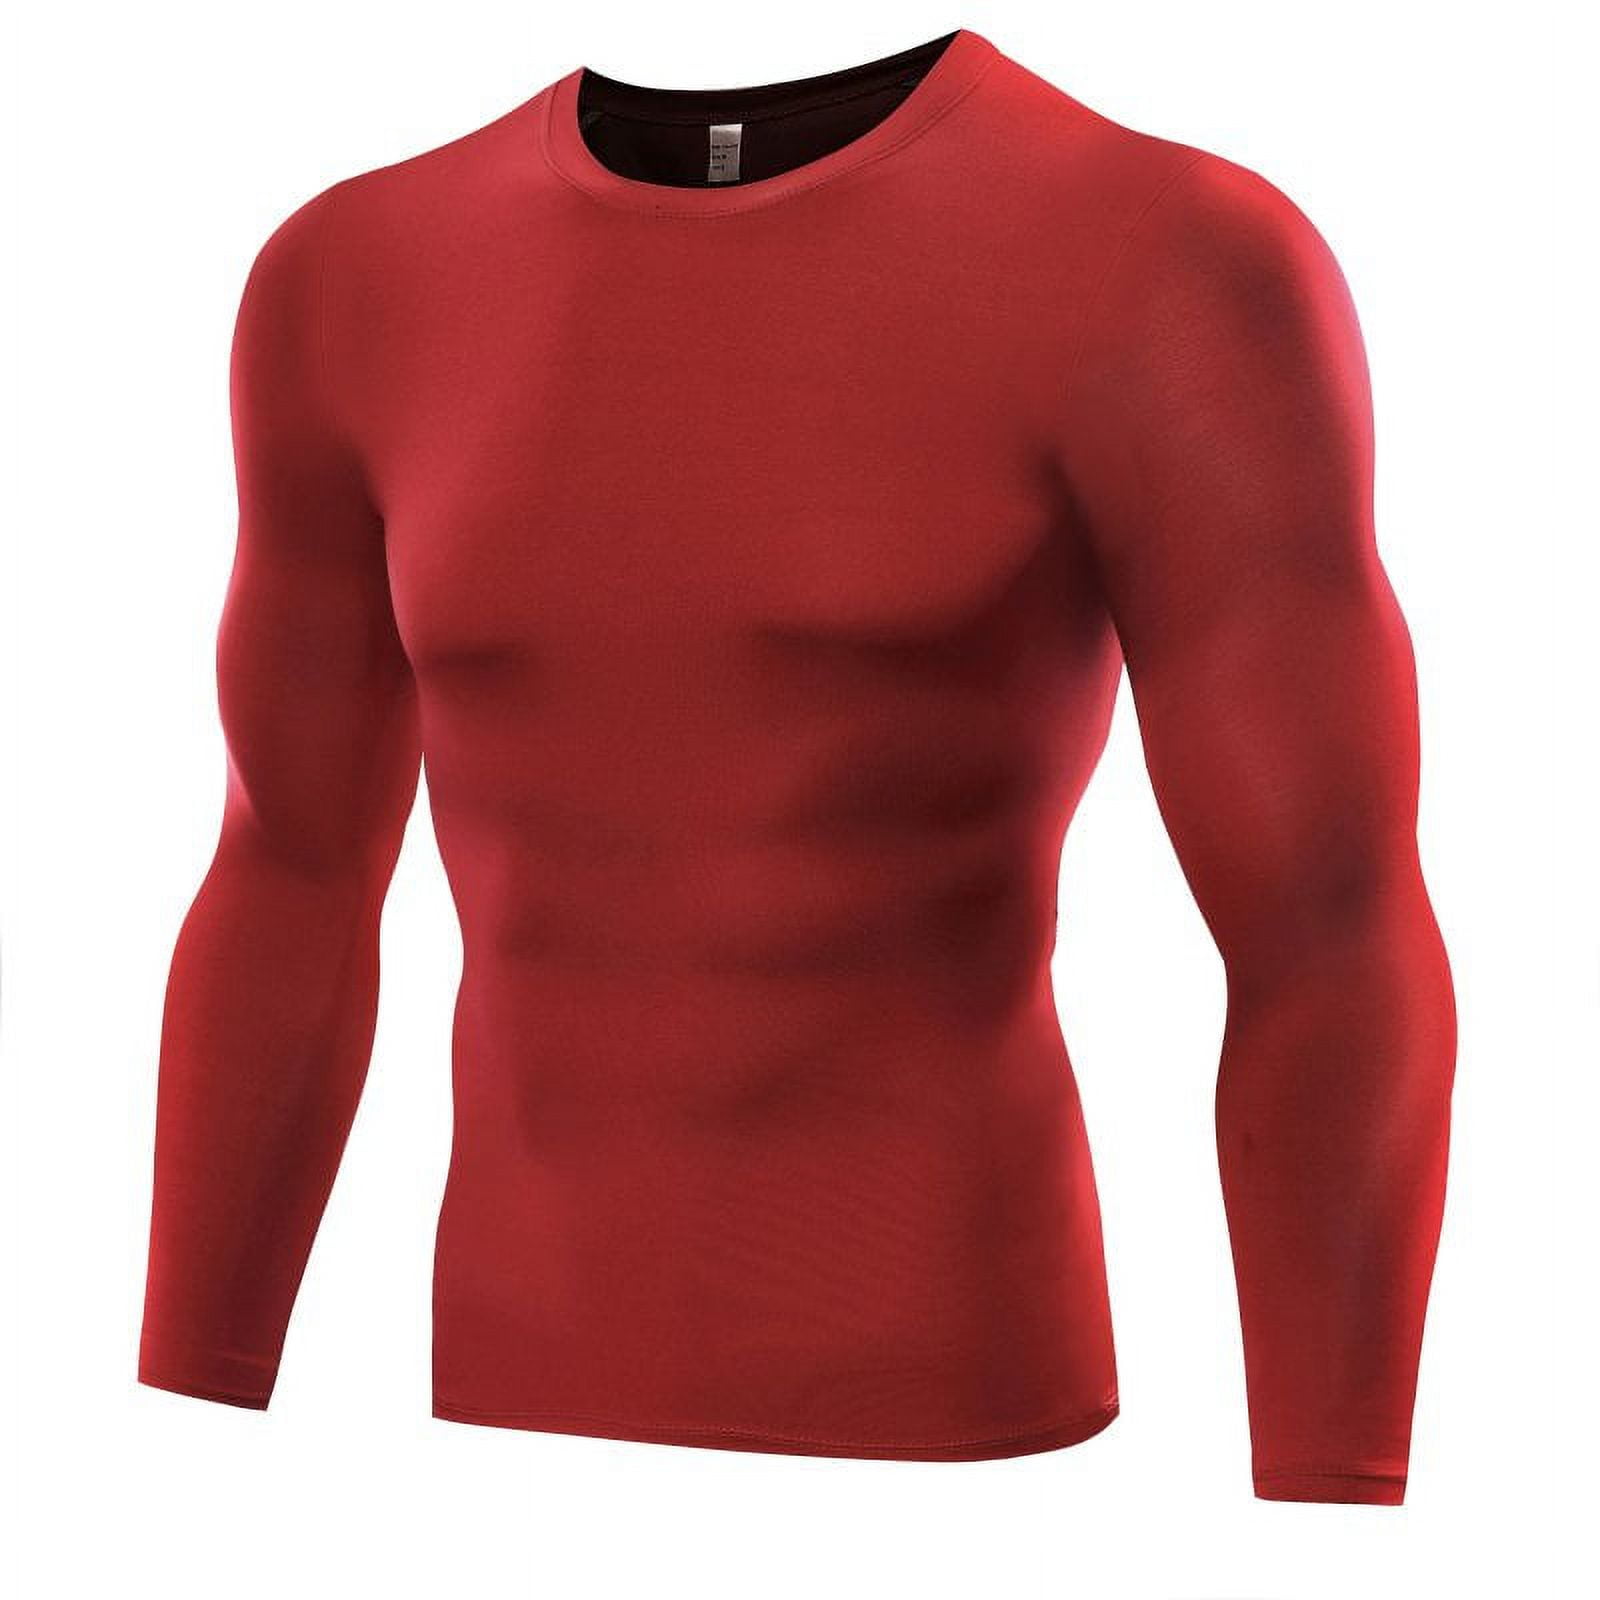  New Compression Shirts For Men 1/2 One Arm Long